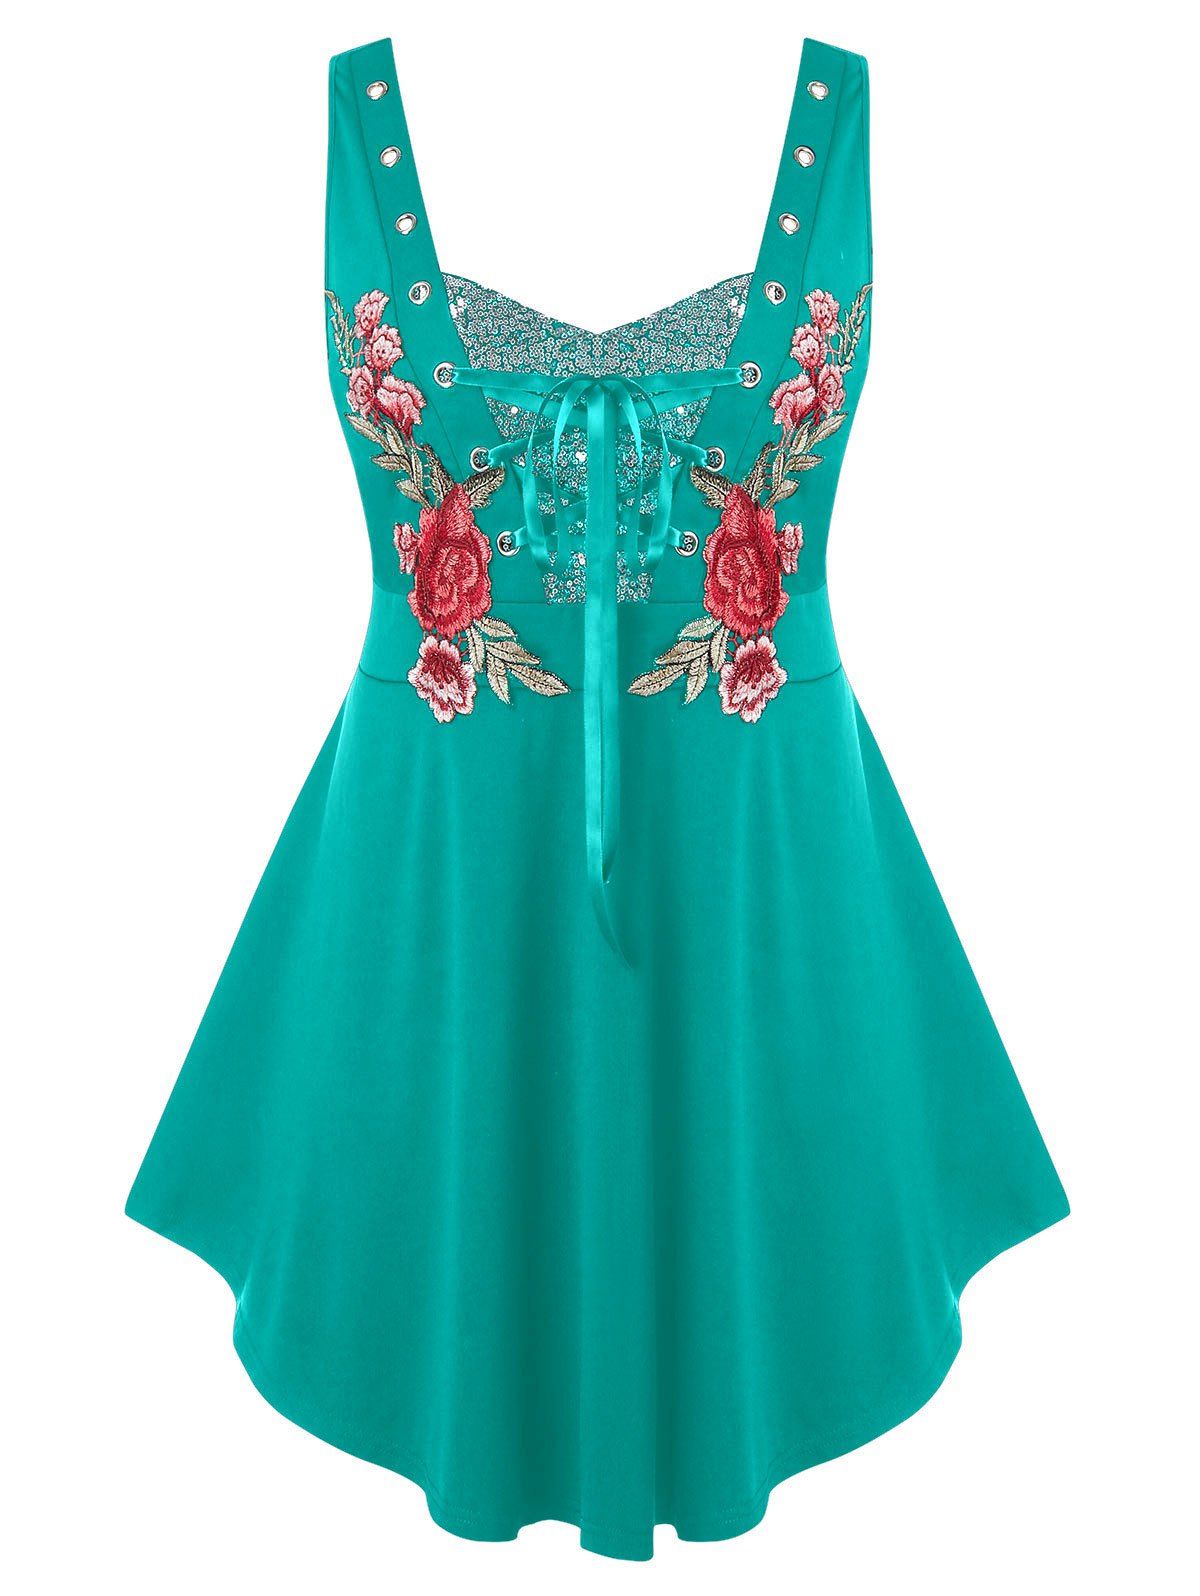 Plus Size Lace Up Sequin Embroidered Tank Top - MEDIUM TURQUOISE L